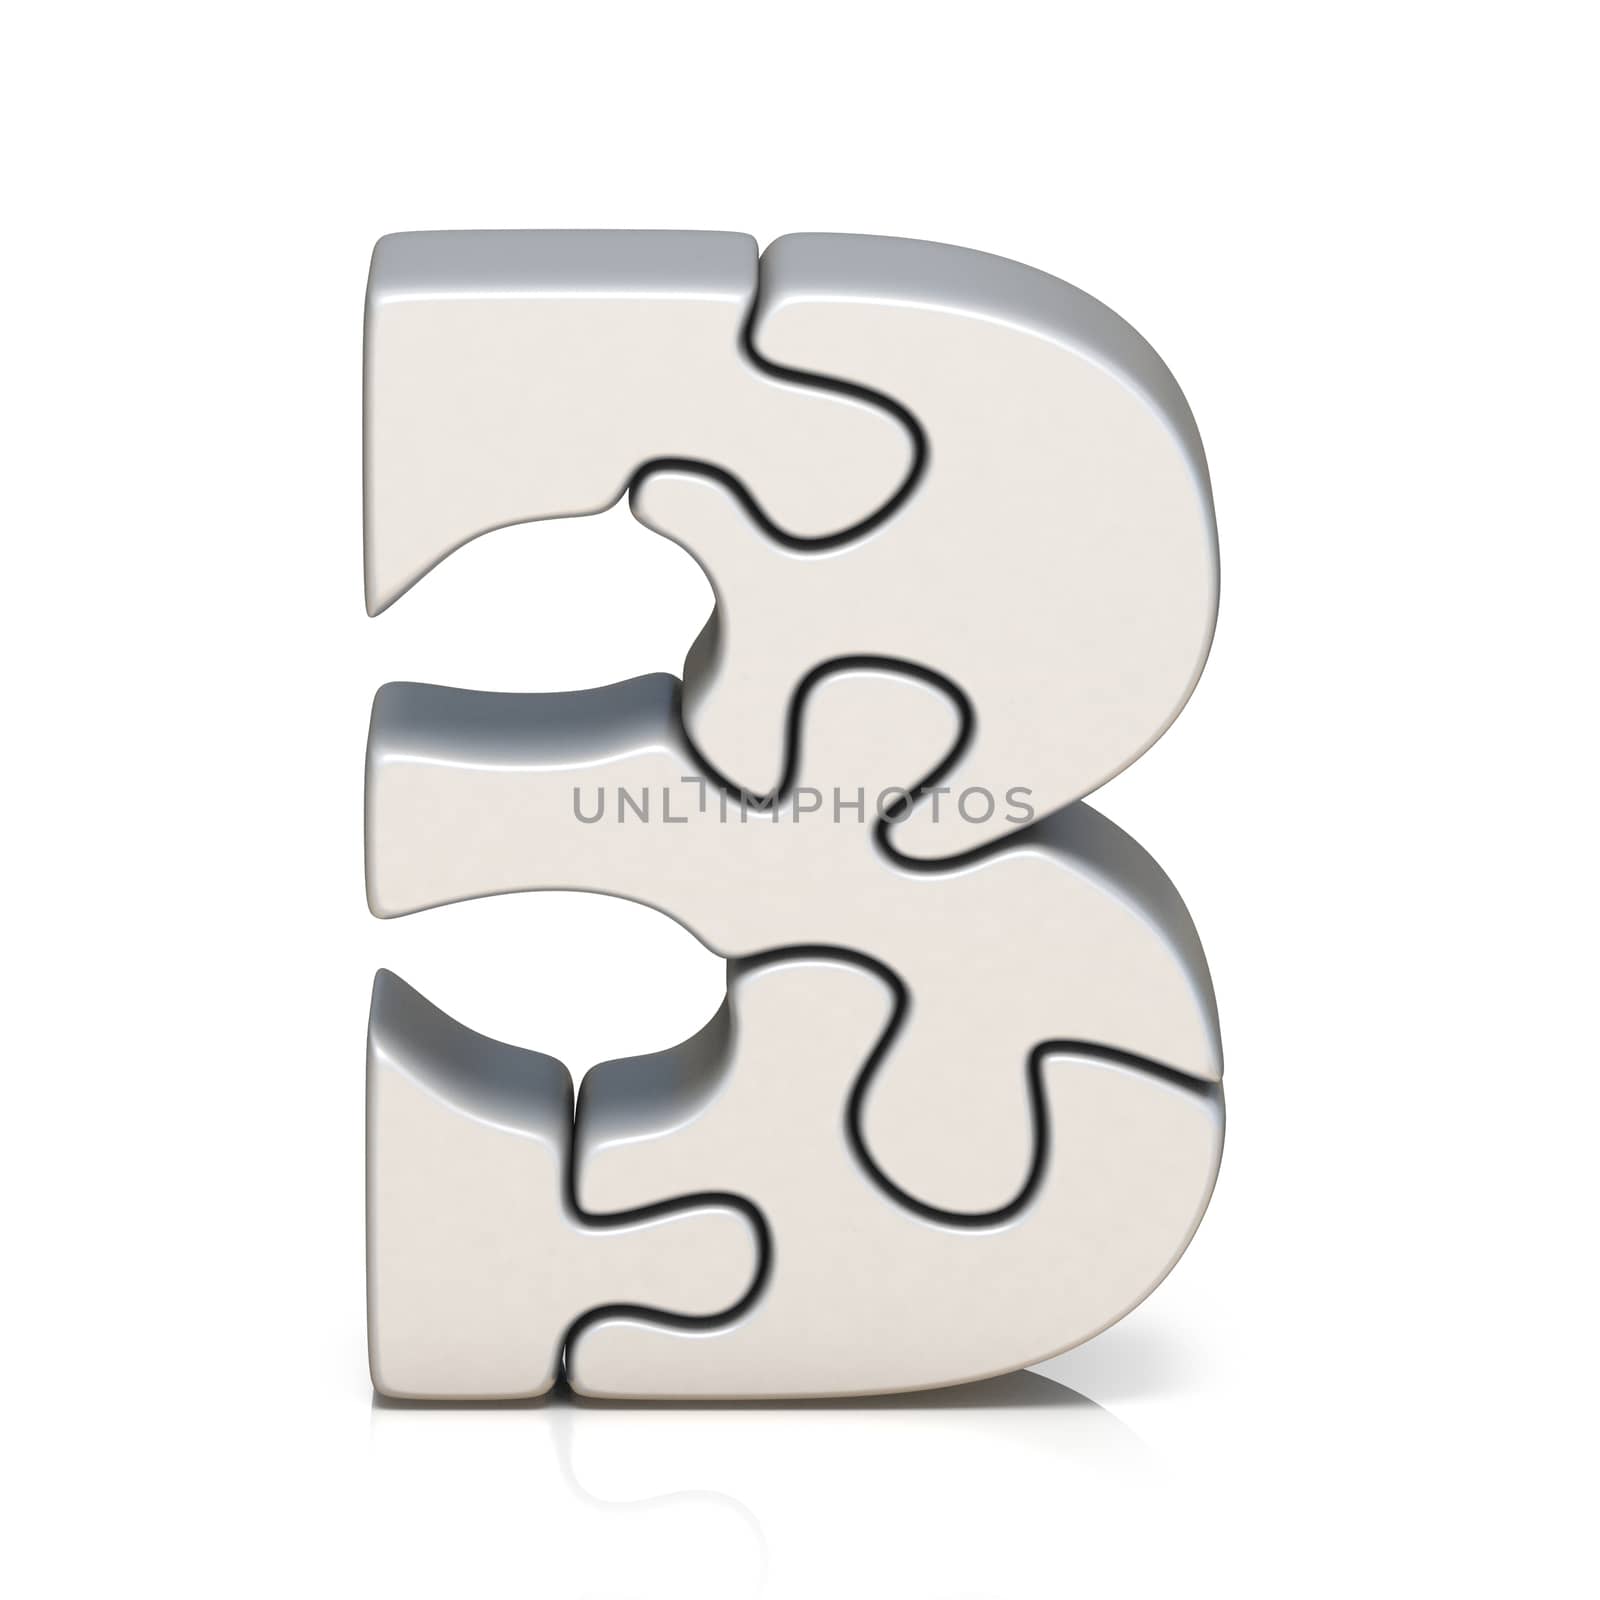 White puzzle jigsaw number THREE 3 3D render illustration isolated on white background